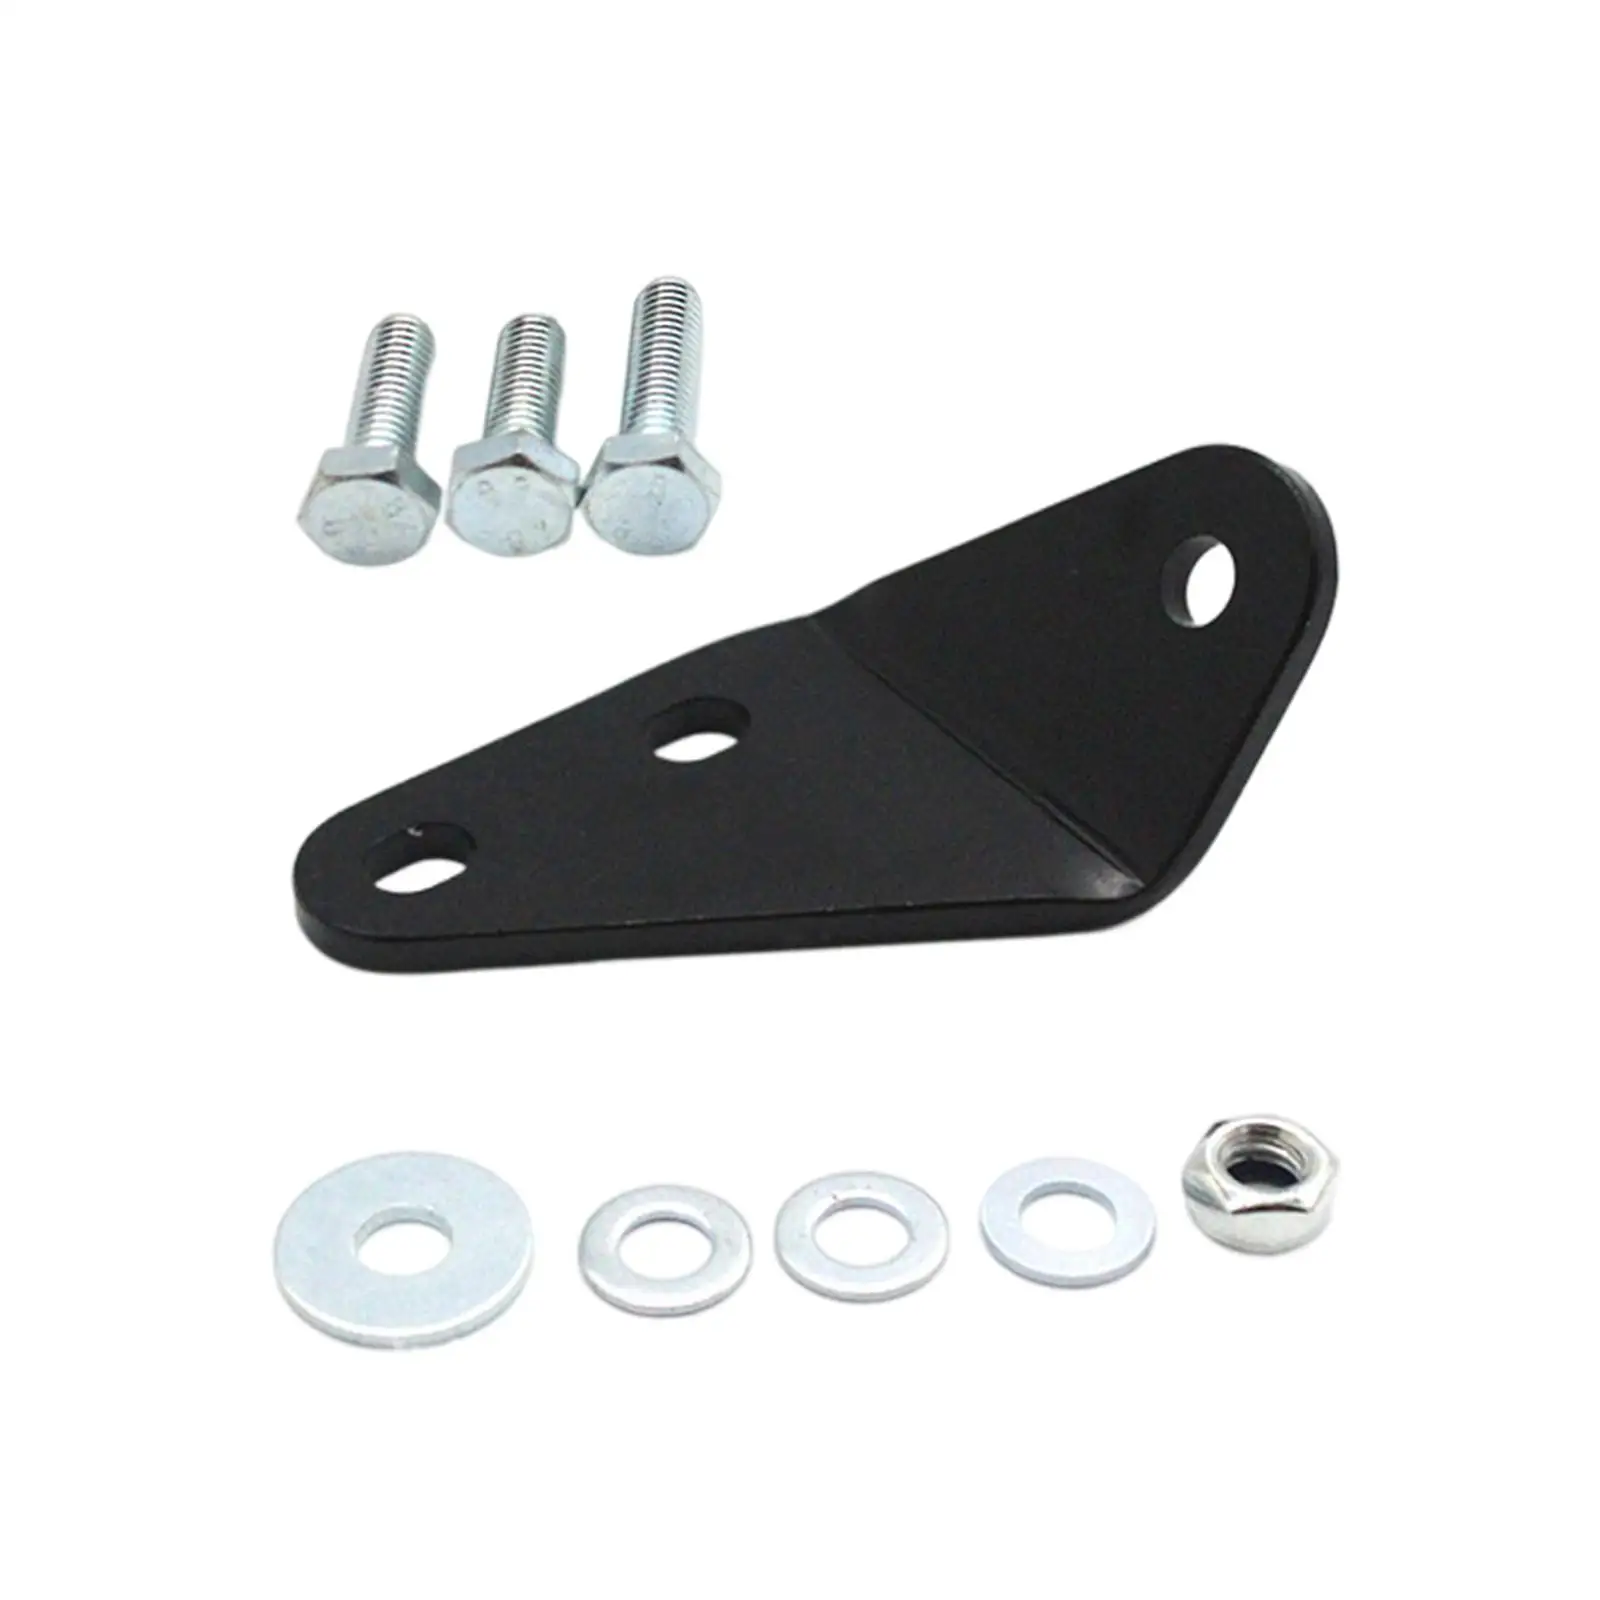 Clutch Pedal Repair Bracket Kit Directly Replace Easy Installation Sturdy for VW T4 Transporter Multivan Accessory